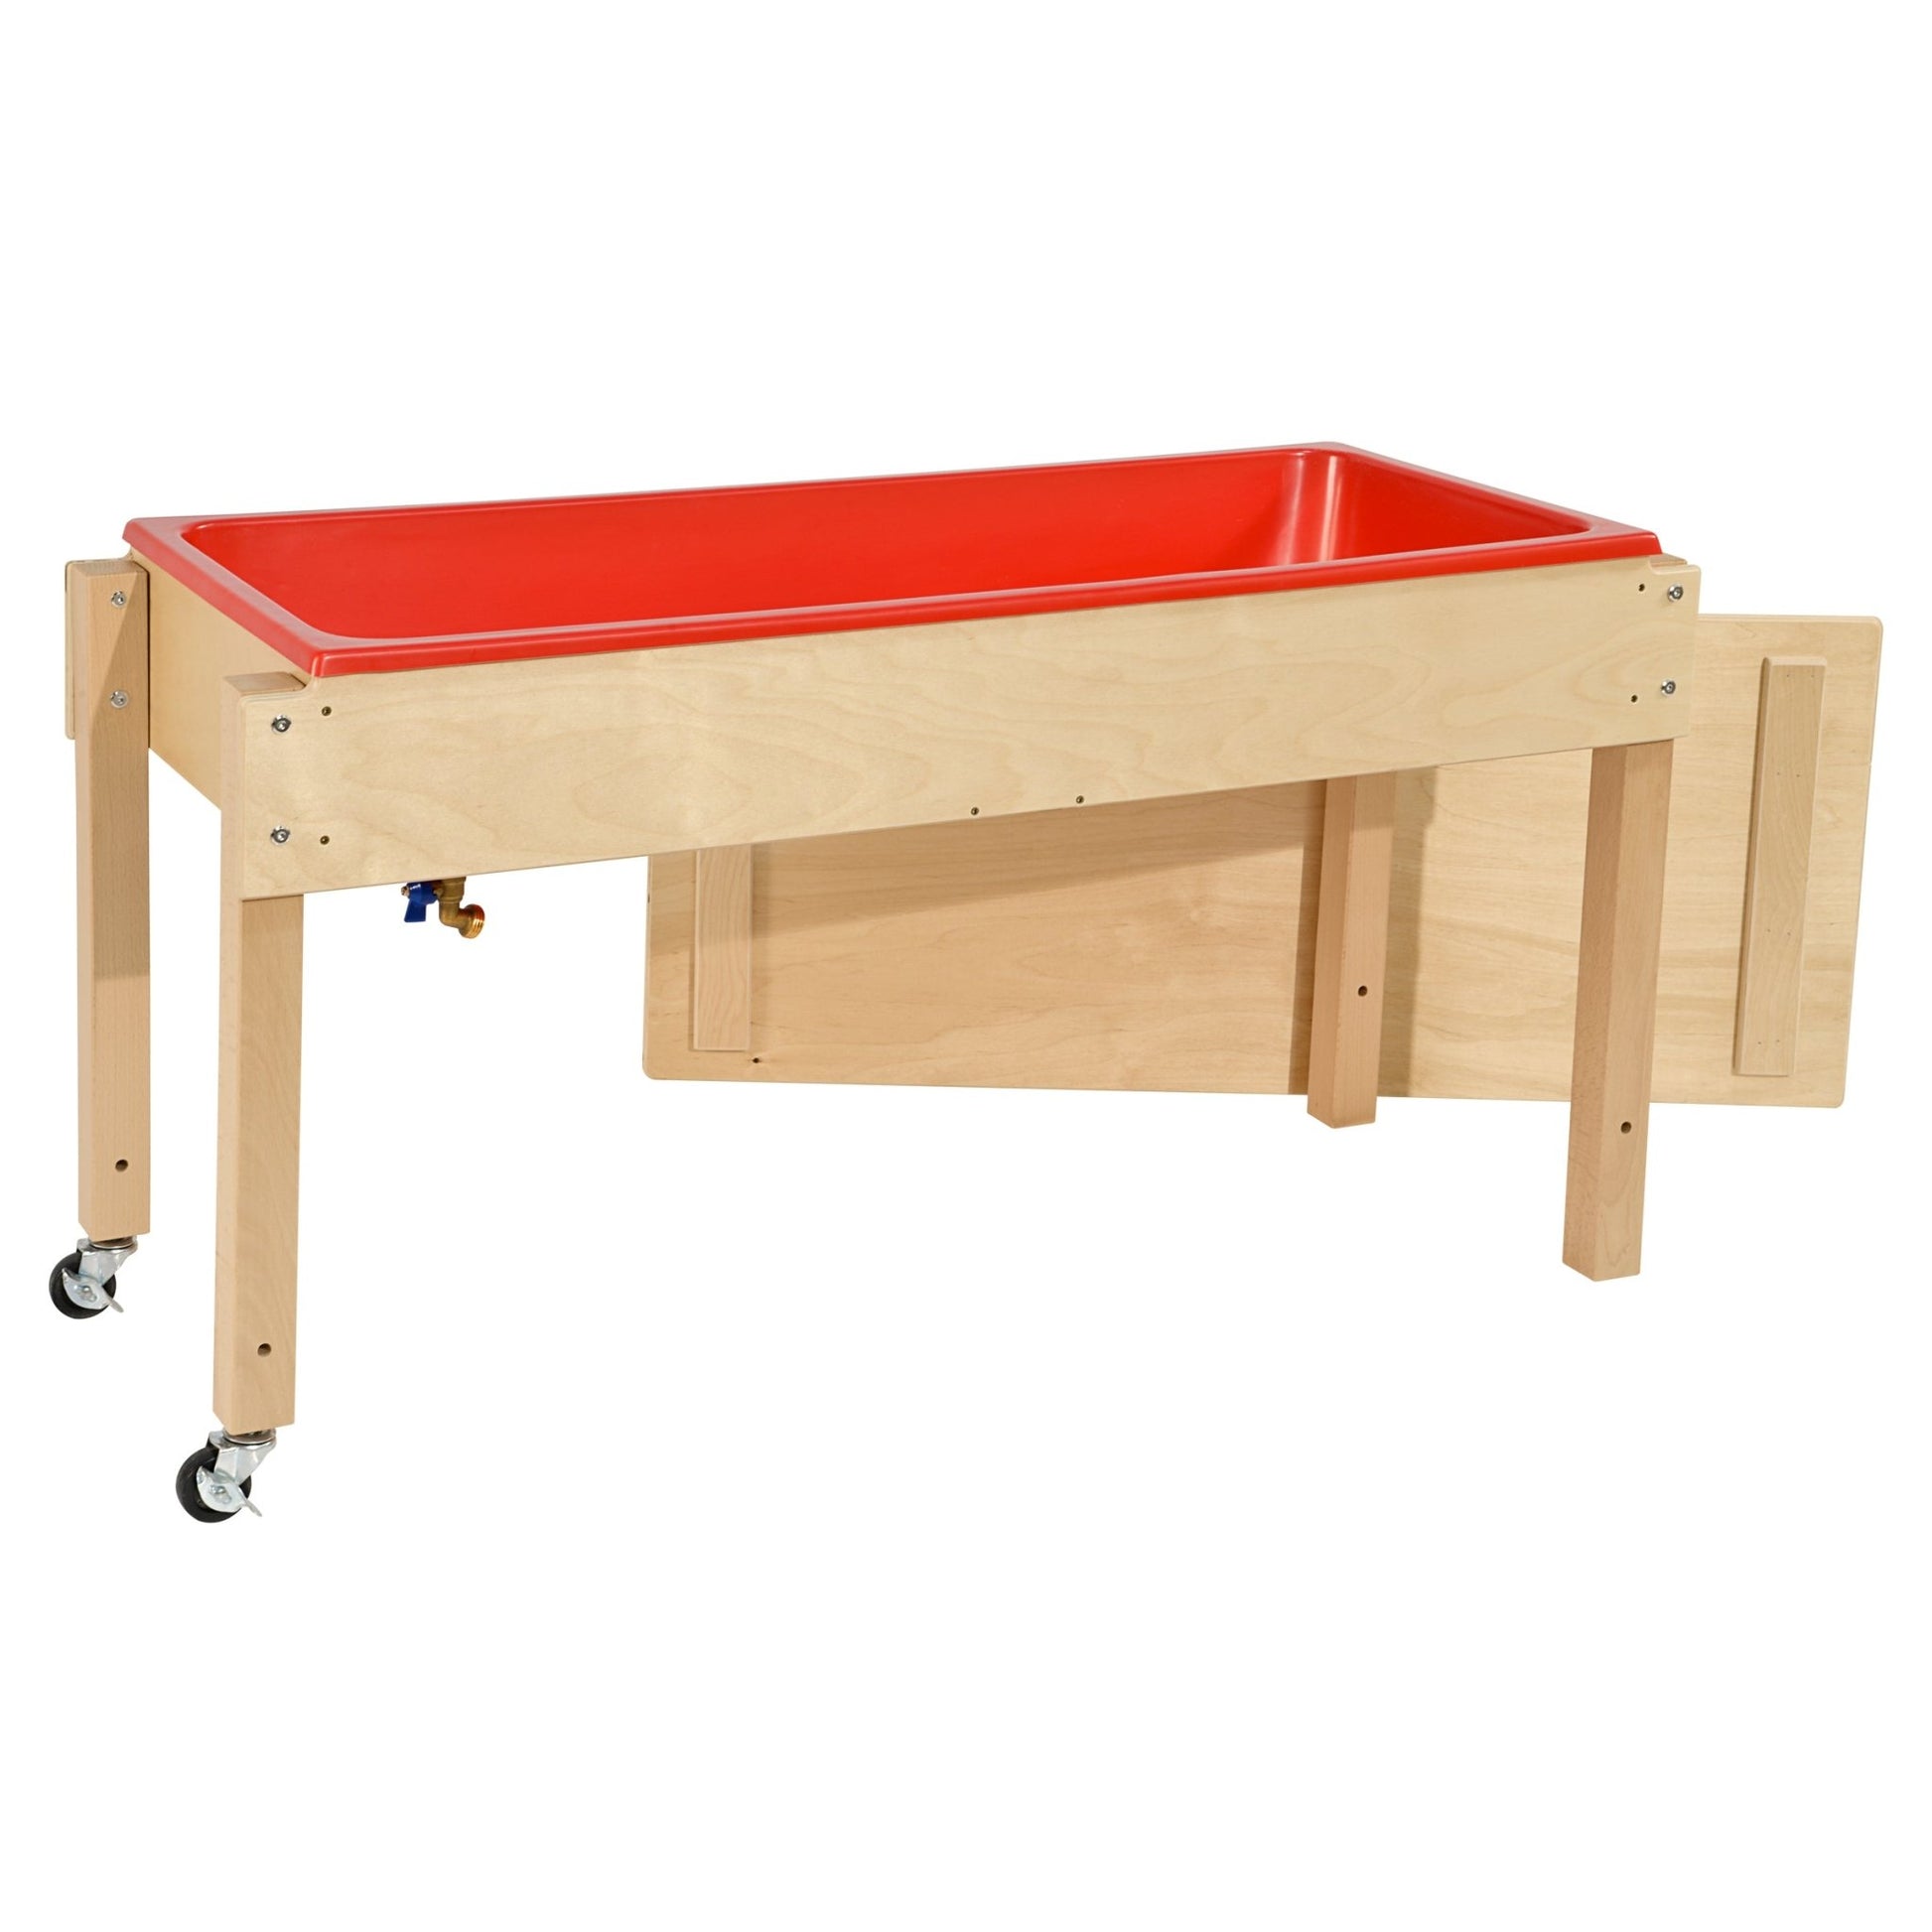 Wood Designs Contender Sand and Water Table - RTA - (C11800) - SchoolOutlet